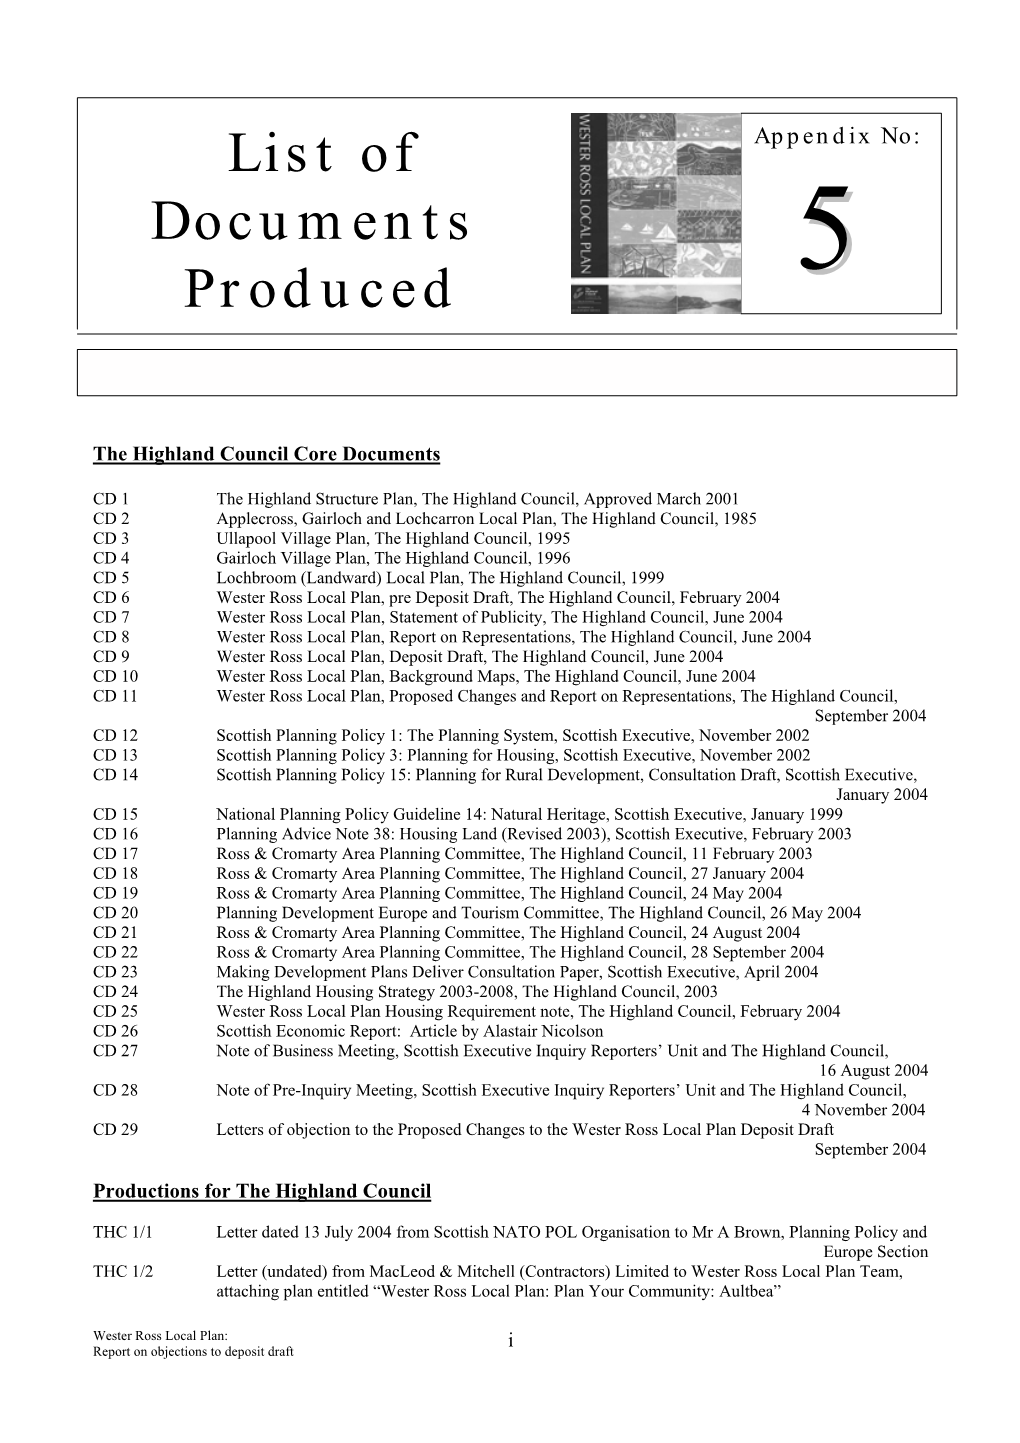 List of Documents Produced